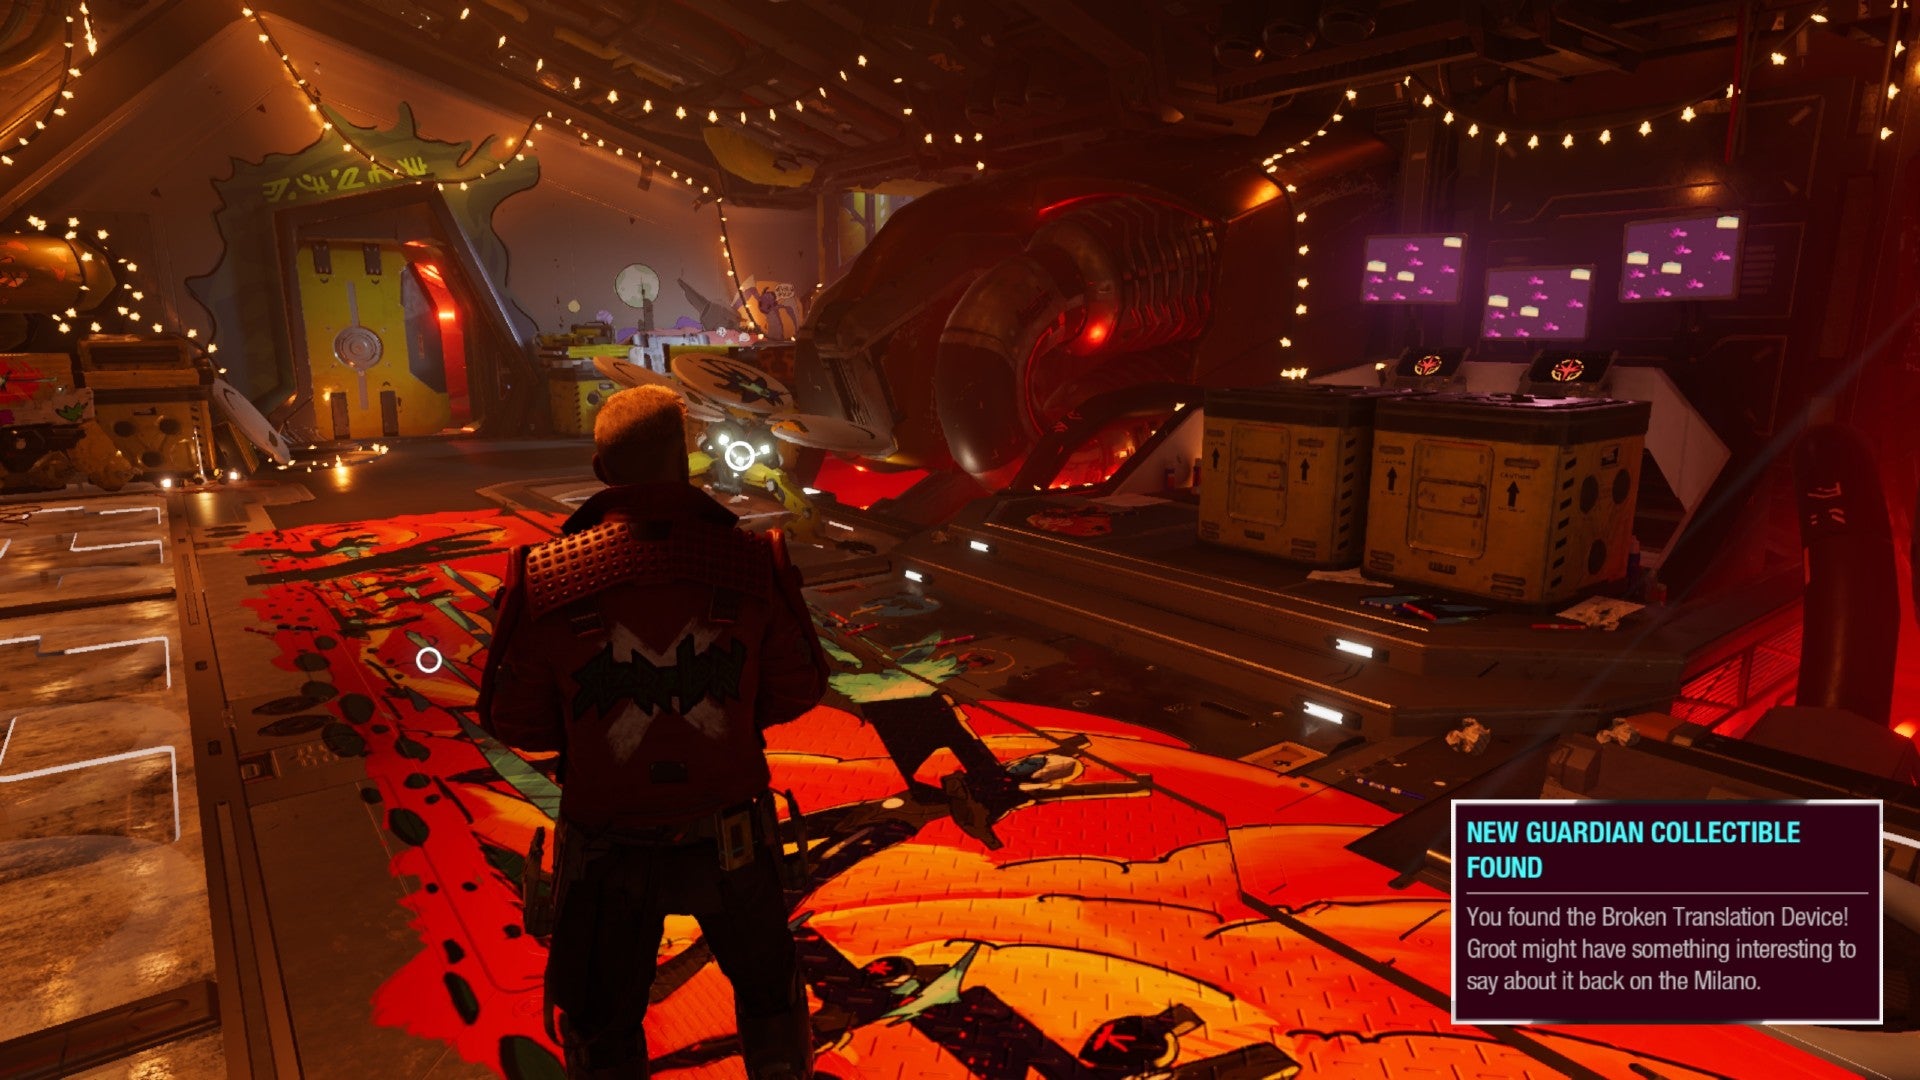 Nikki's secret hideout in Guardians of the Galaxy, with pop up in lower right corner showing that player has found a hidden collectible